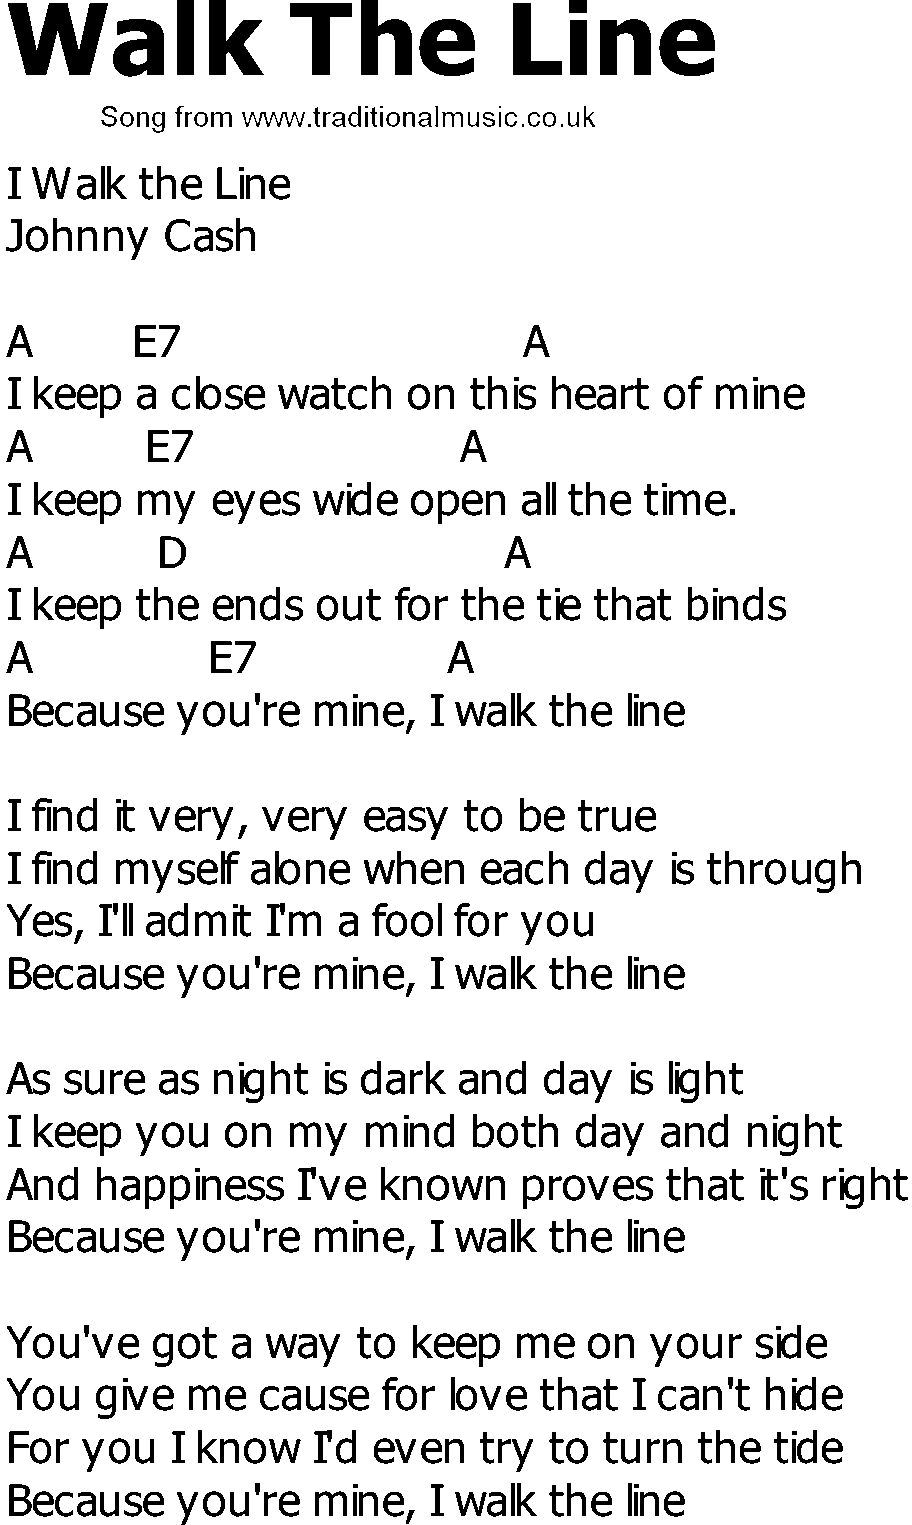 Old Country song lyrics with chords - Walk The Line